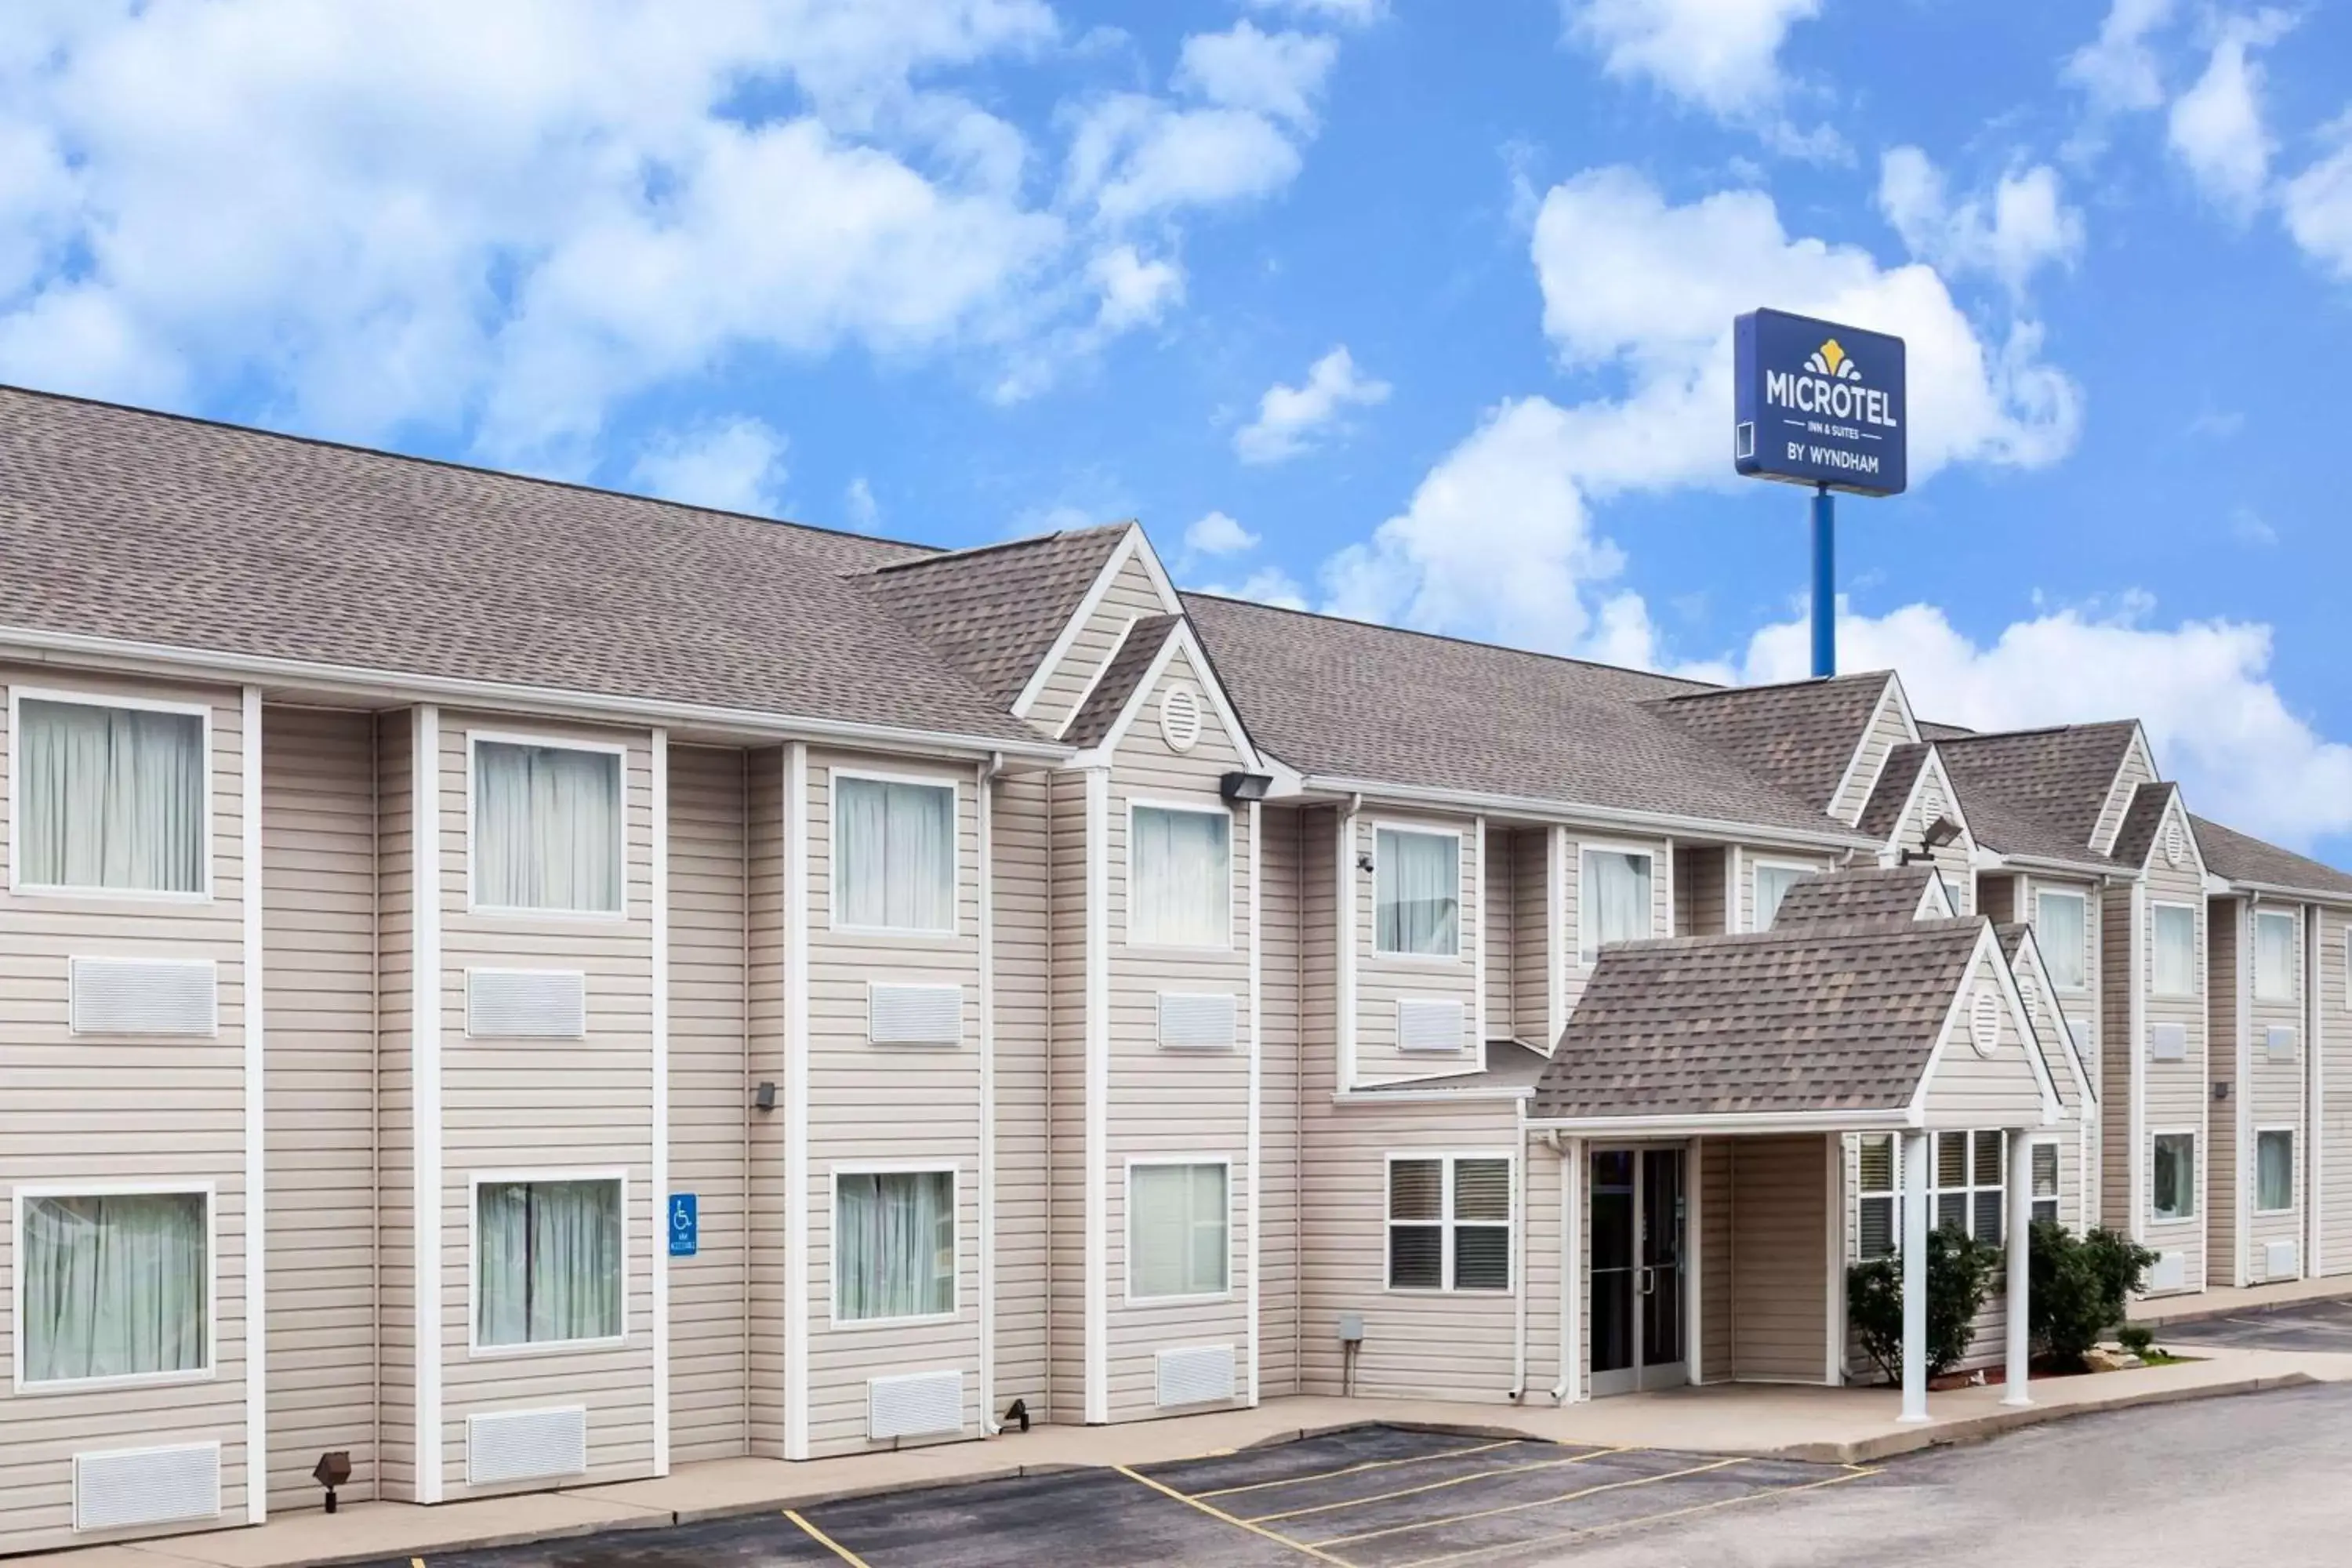 Property Building in Microtel Inn by Wyndham Ardmore